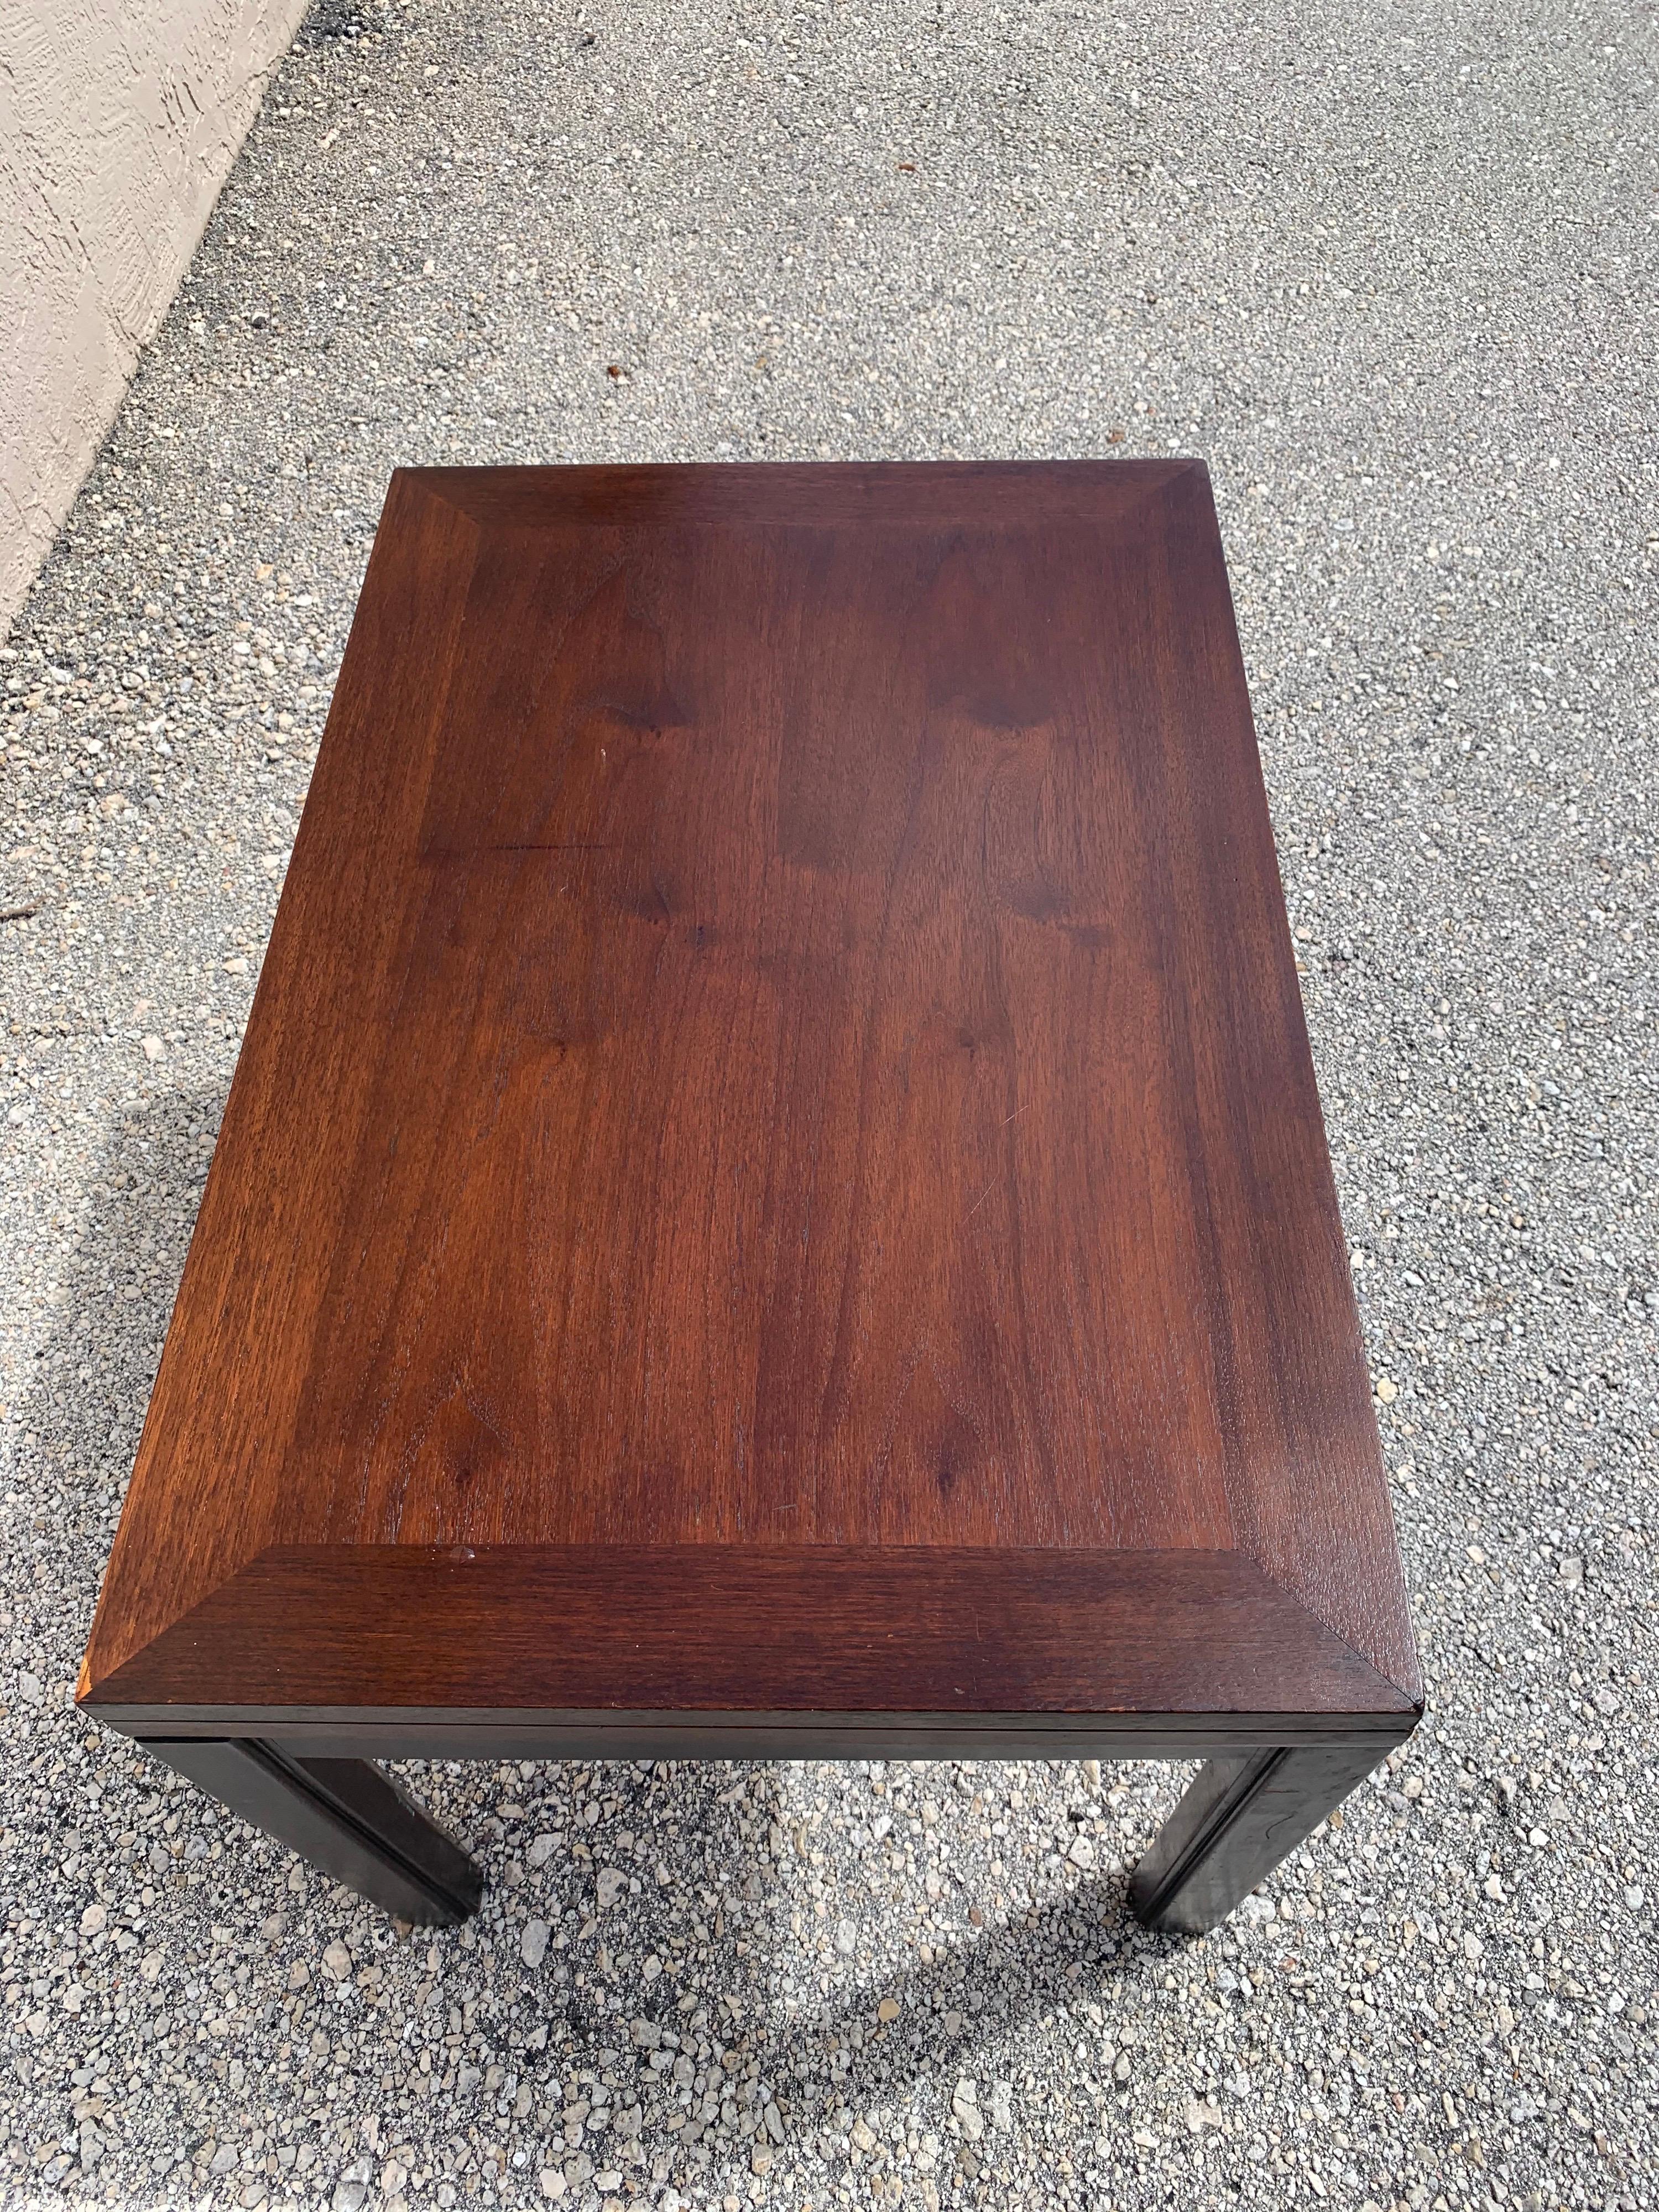 Mid-Century Modern Uncommon Edward Wormley for Dunbar Flip Top Coffee Table For Sale